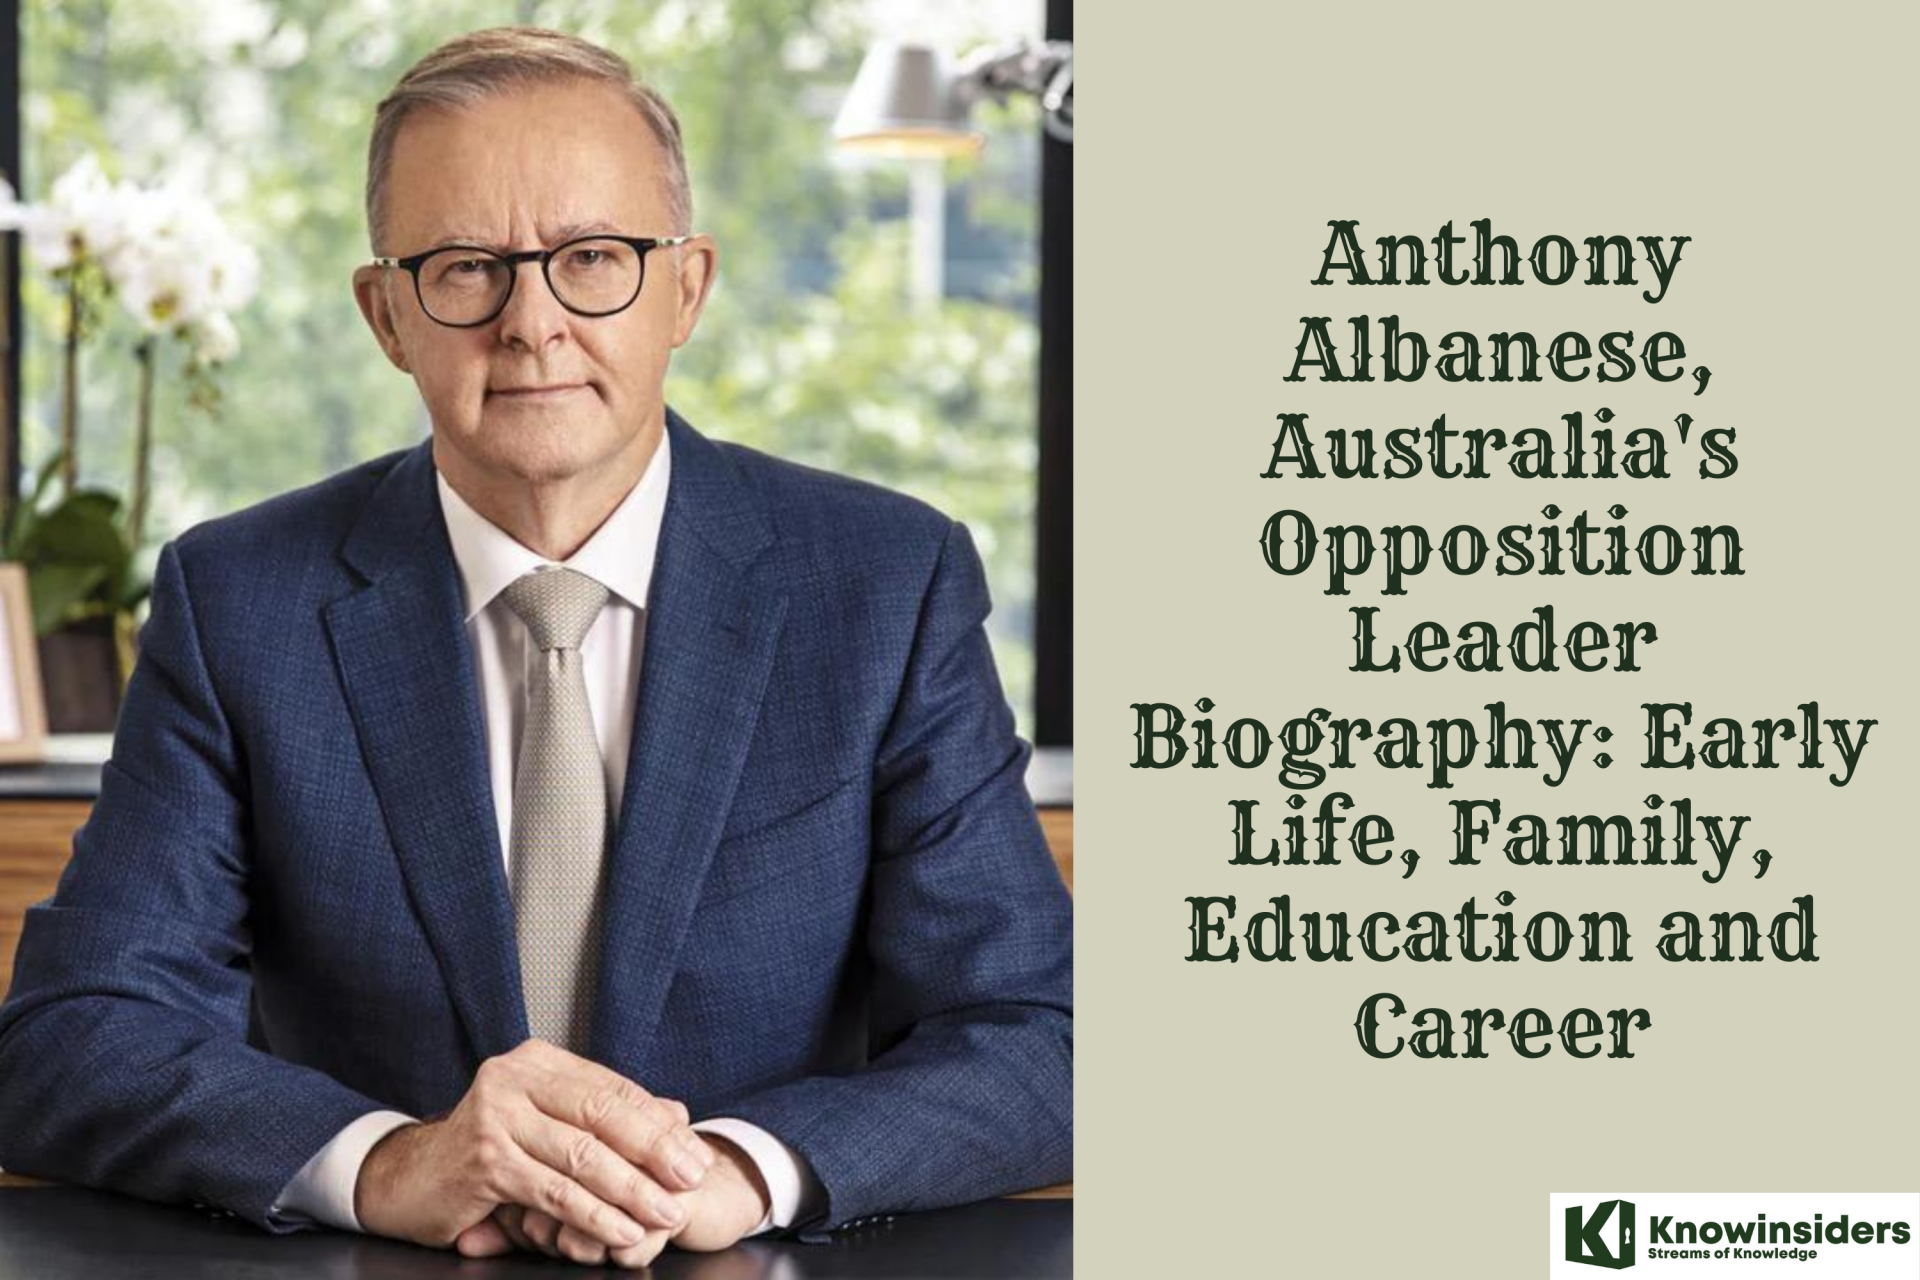 Anthony Albanese, Australia's Opposition Leader Biography: Early Life, Family, Education and Career